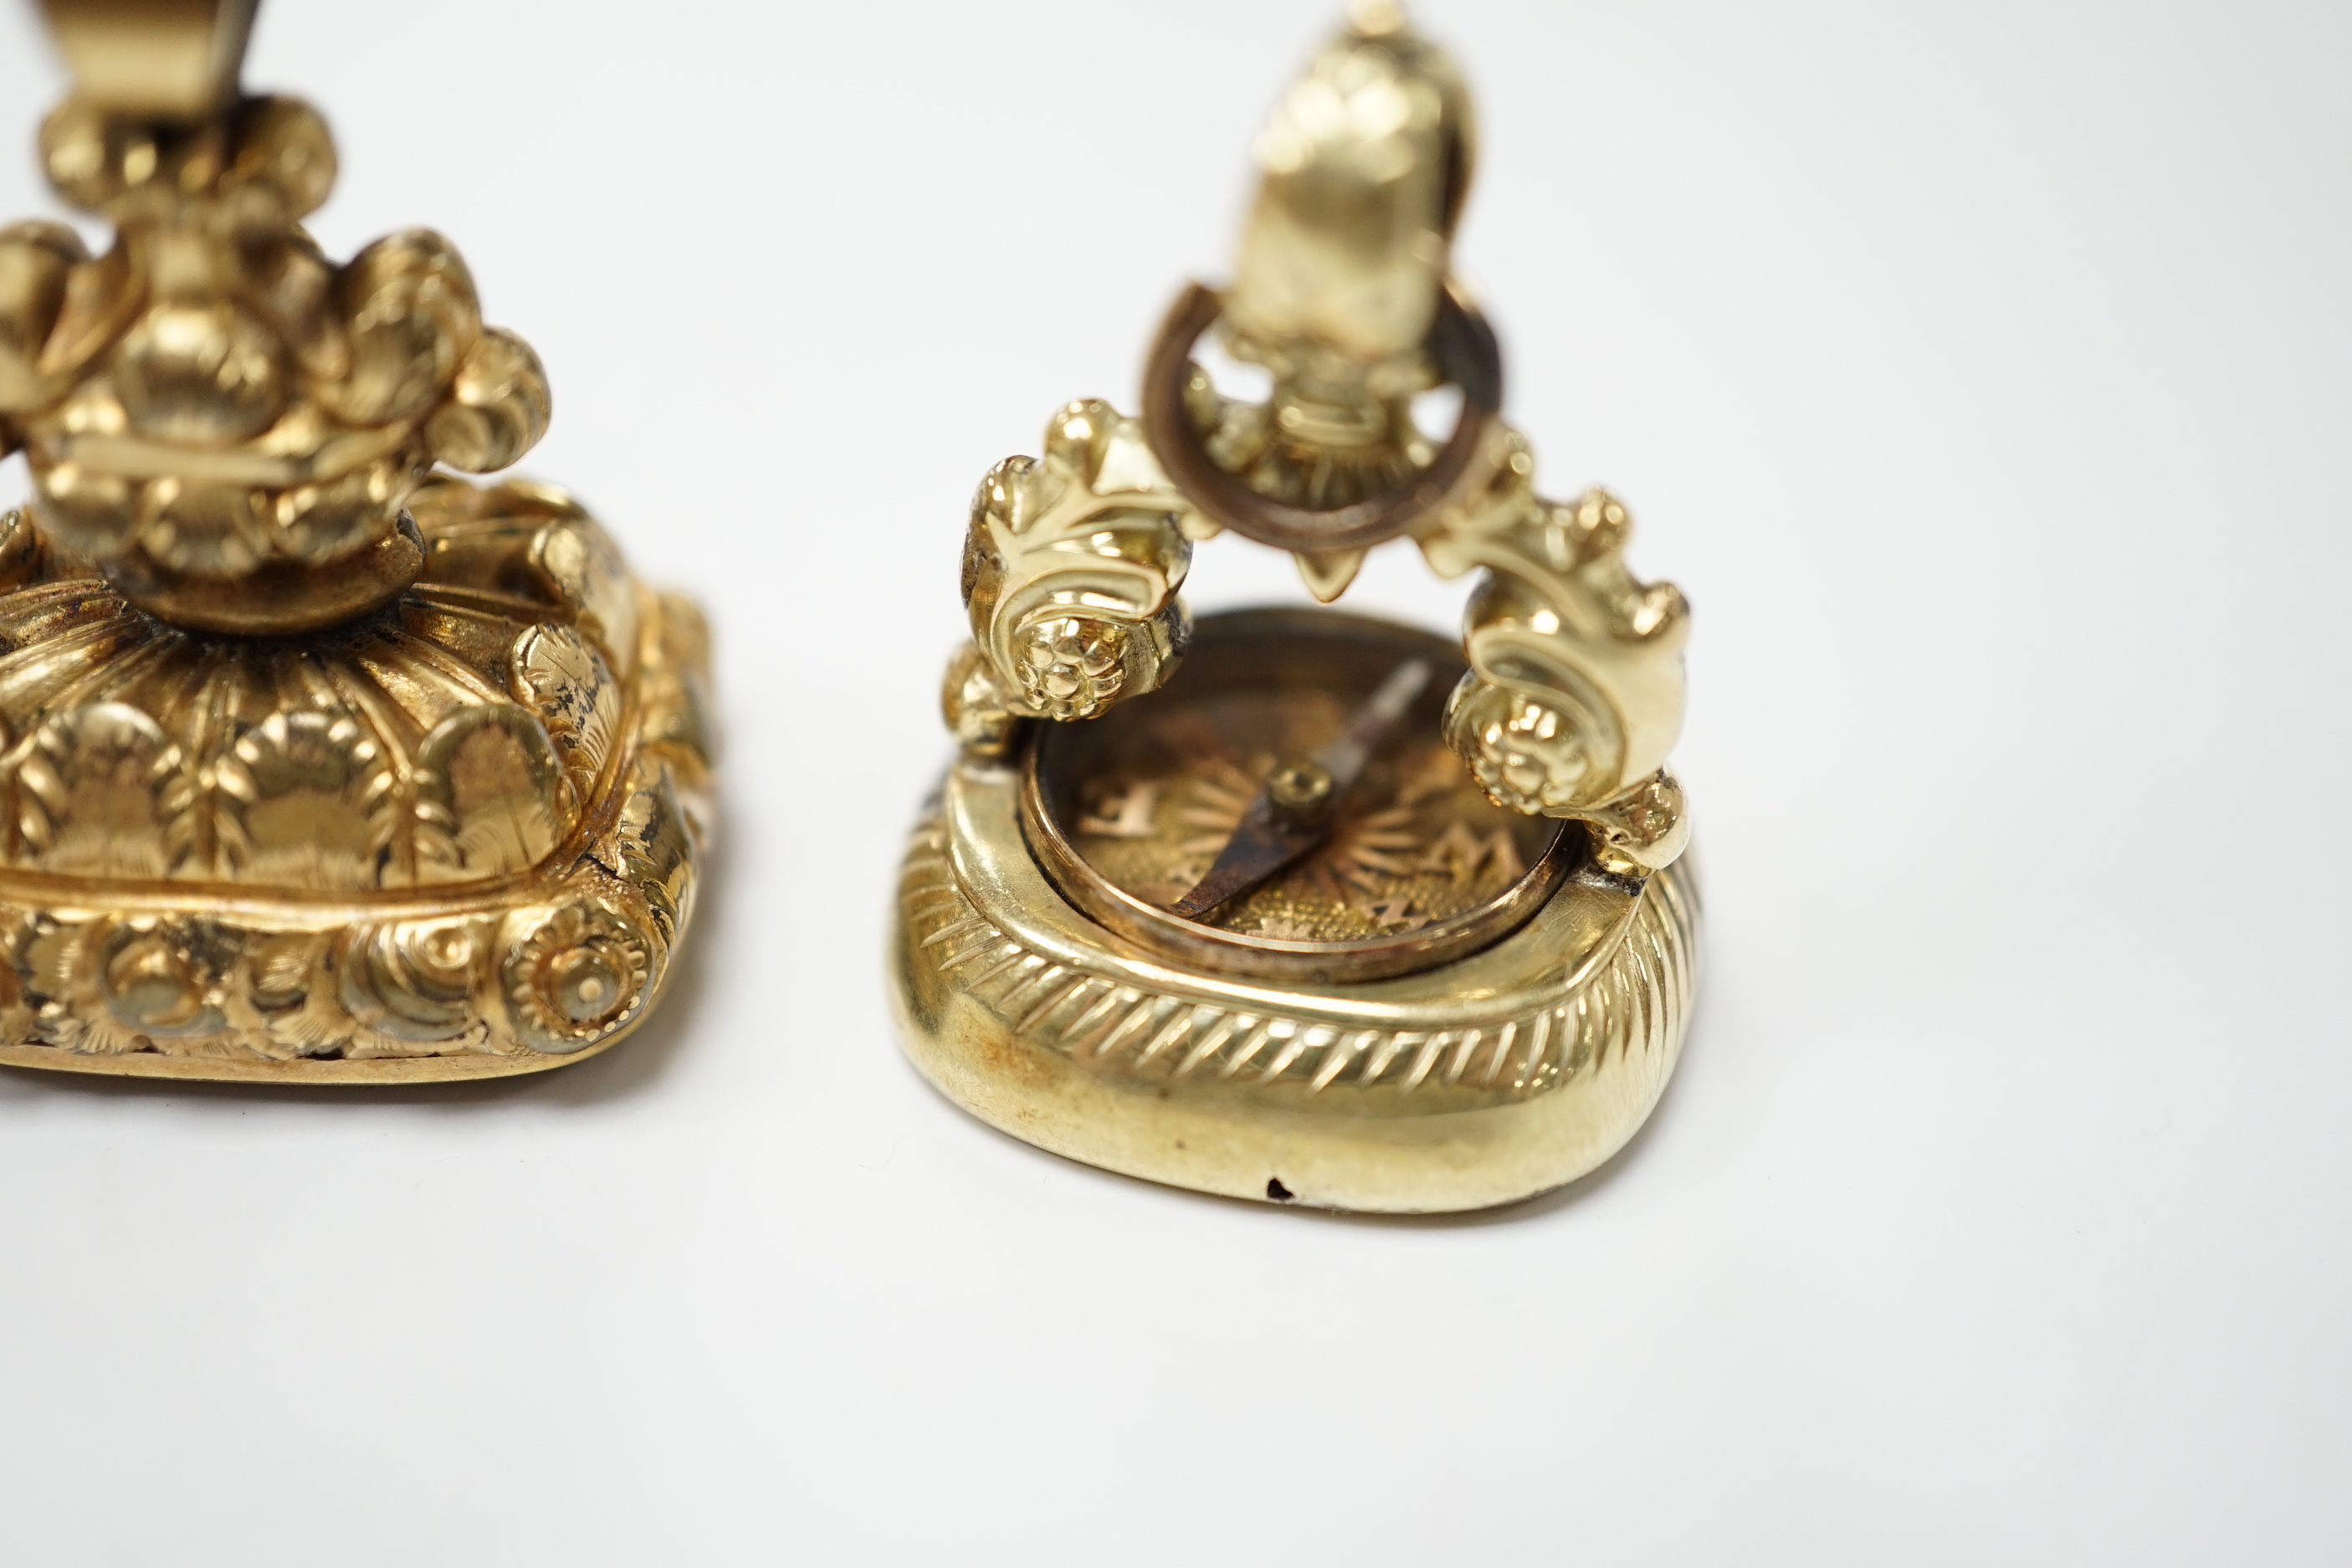 Two 19th century yellow metal overlaid fob seals, the largest 32mm with inset citrine carved with ornate crest and inscribed 'Joy of Life', the other with inset carnelian craved with bee and inscribed 'Non Sibi'.